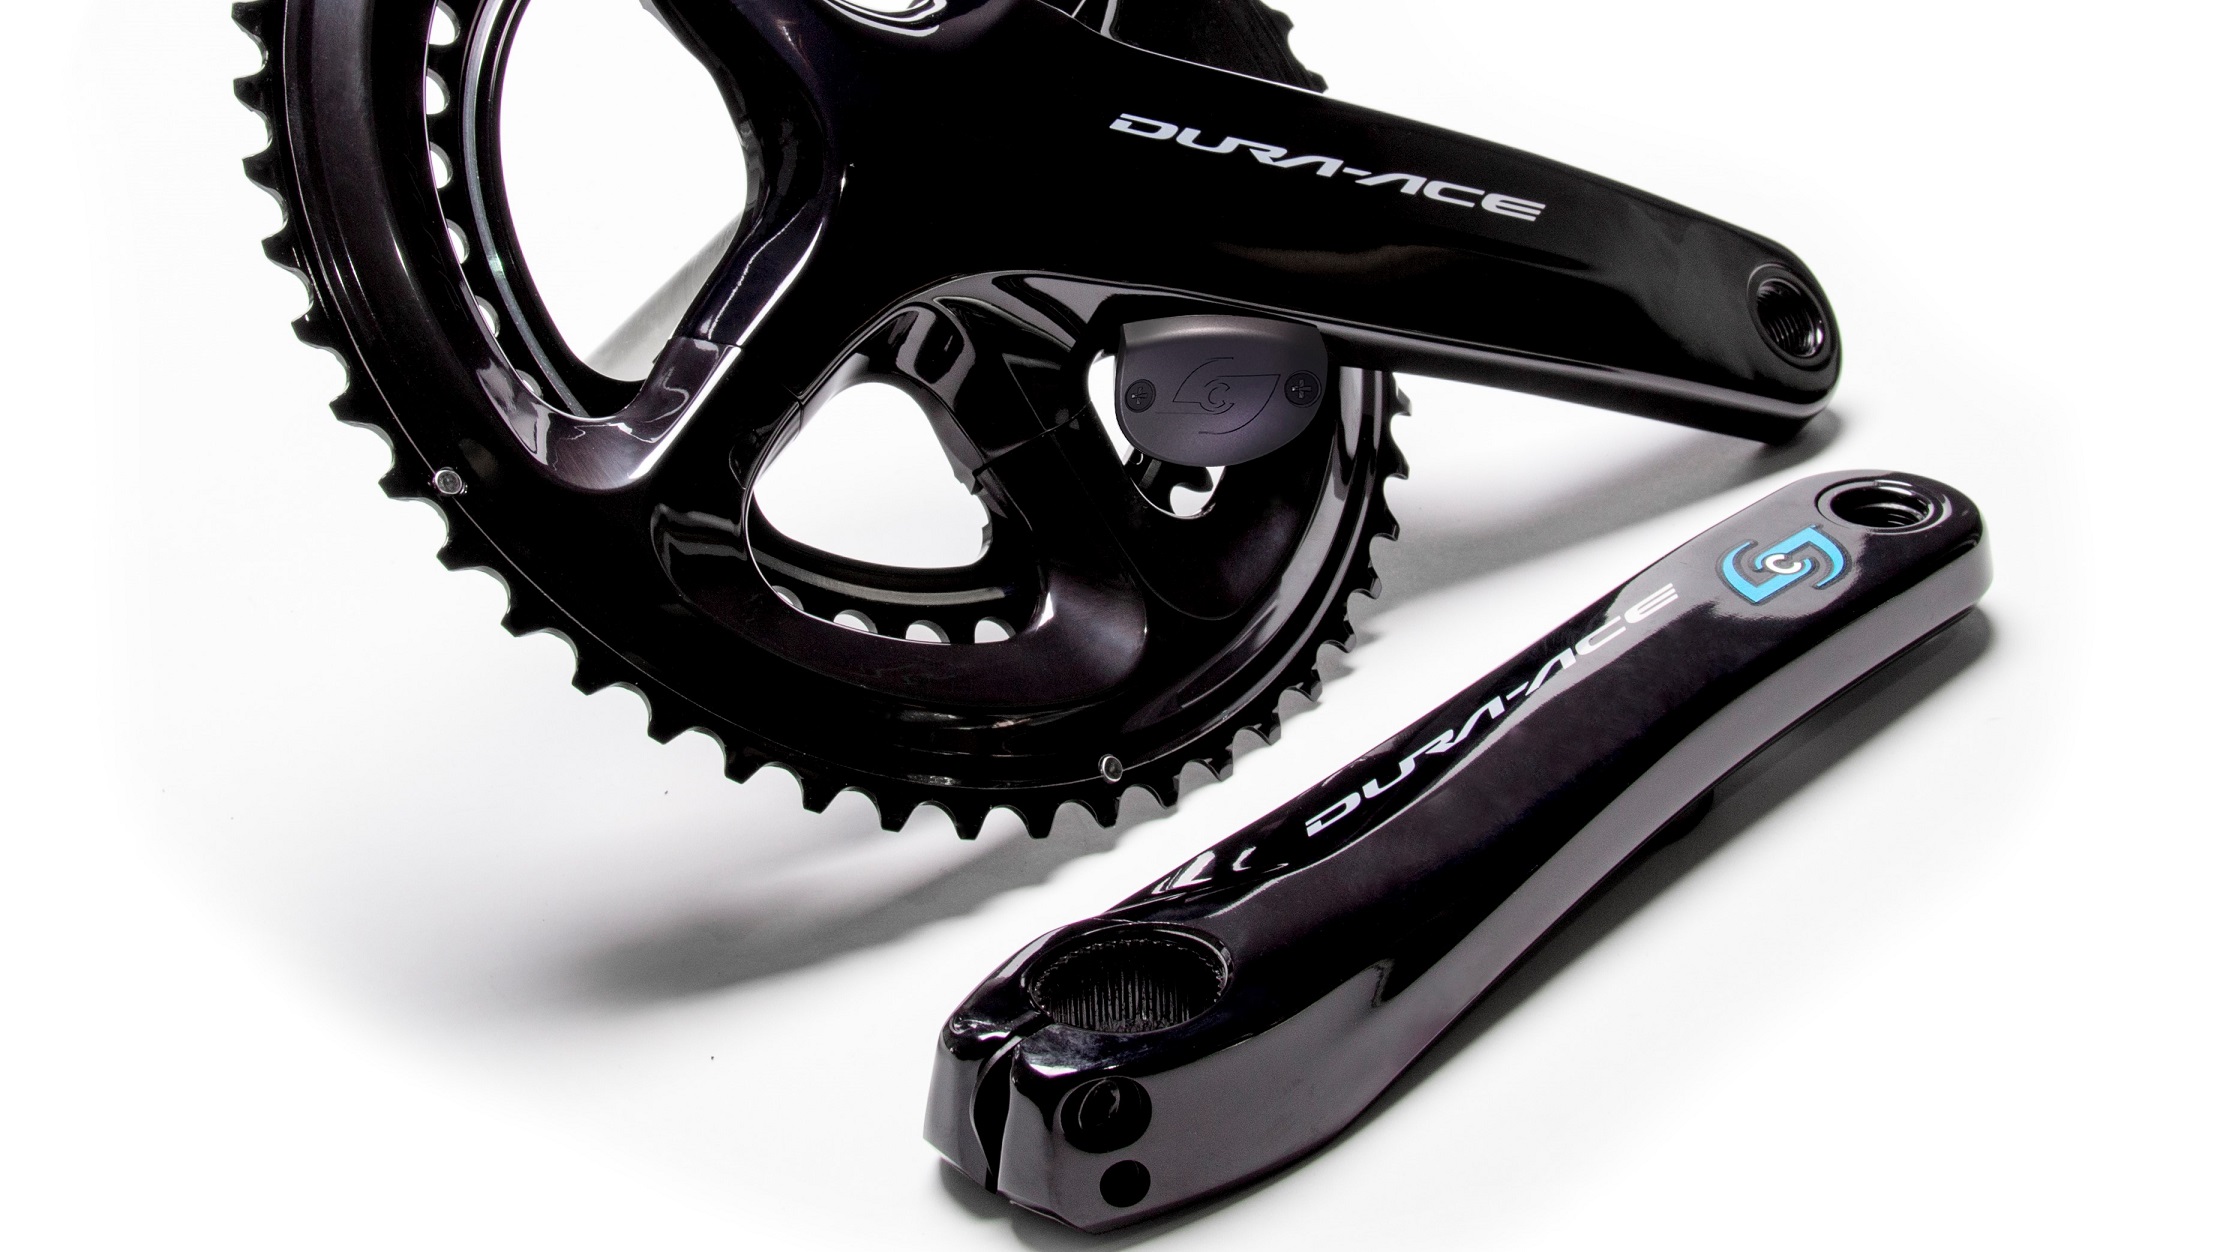 stages power meter r7000